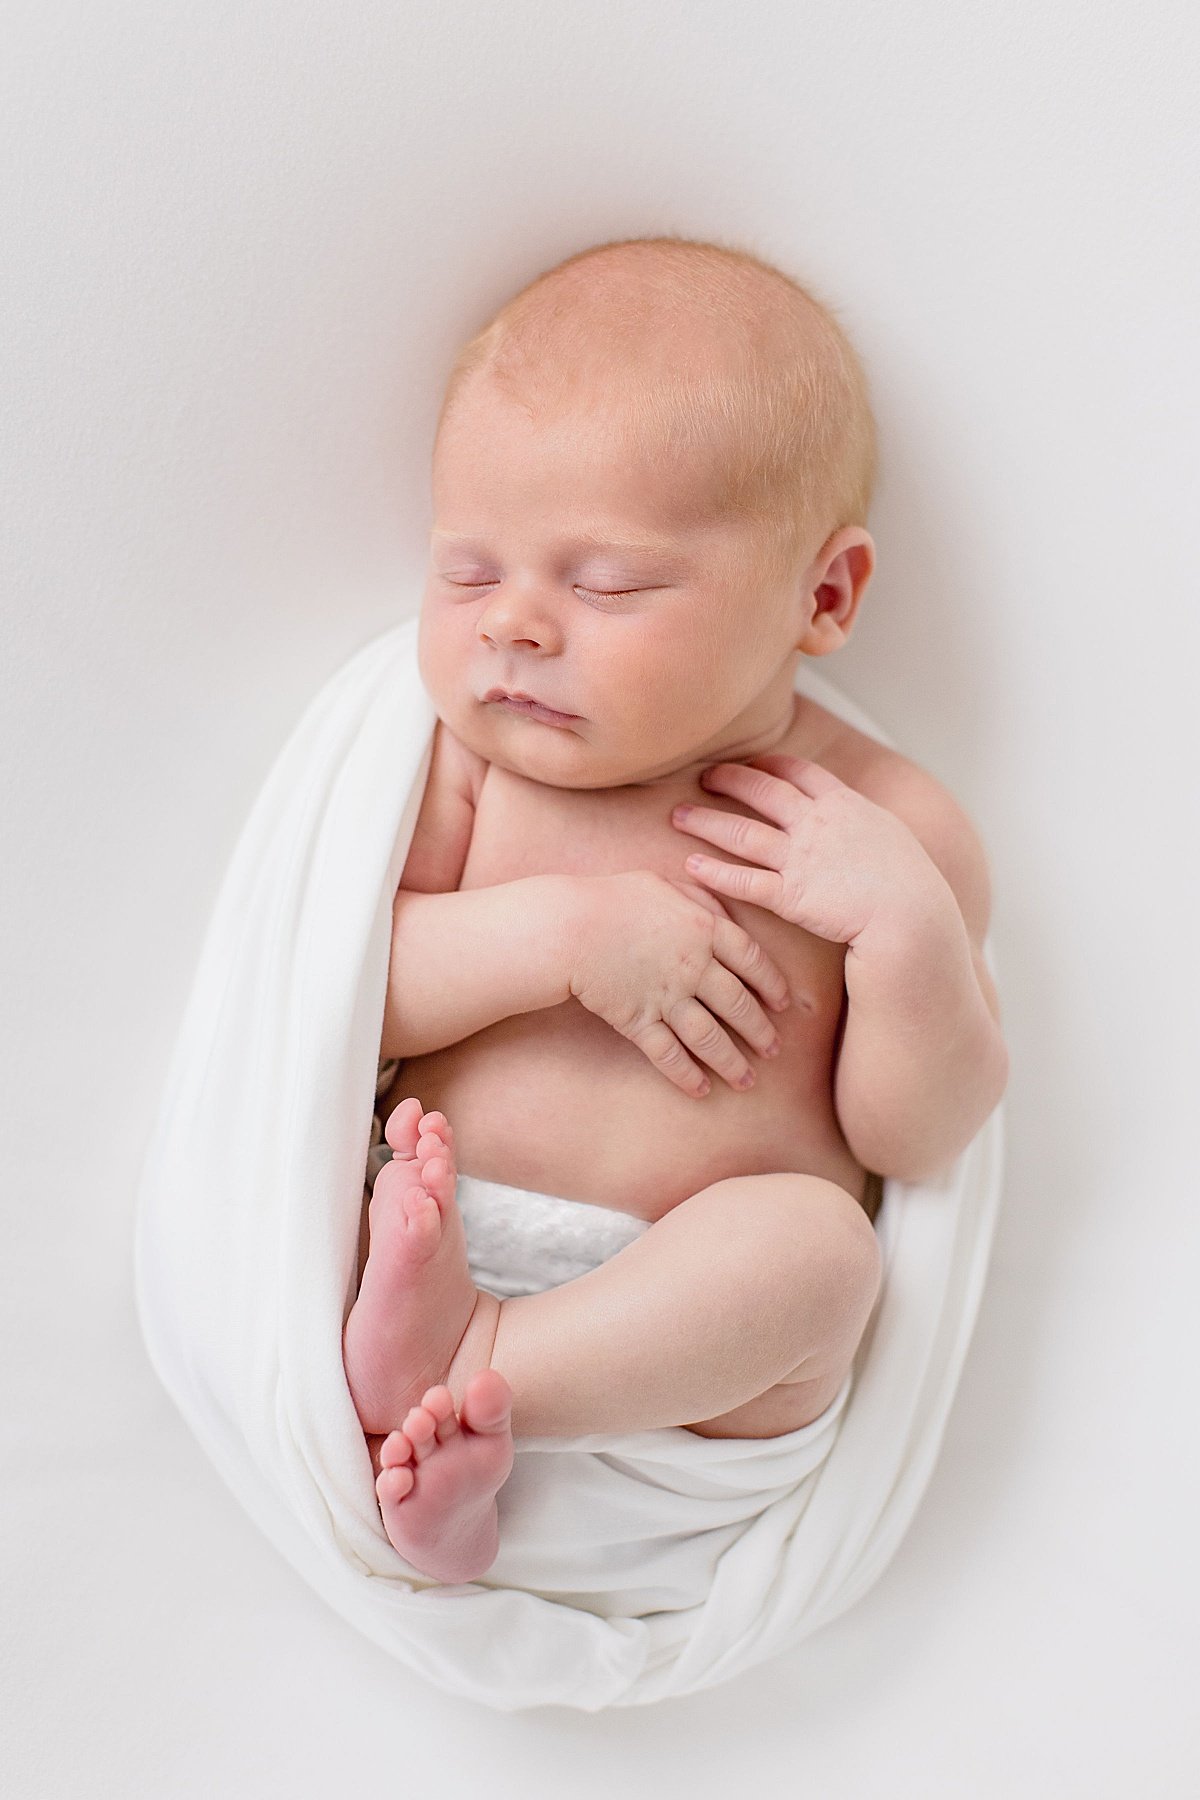 Newborn swaddled during Newborn Baby Session with photographer Ambre Williams in Newport Beach